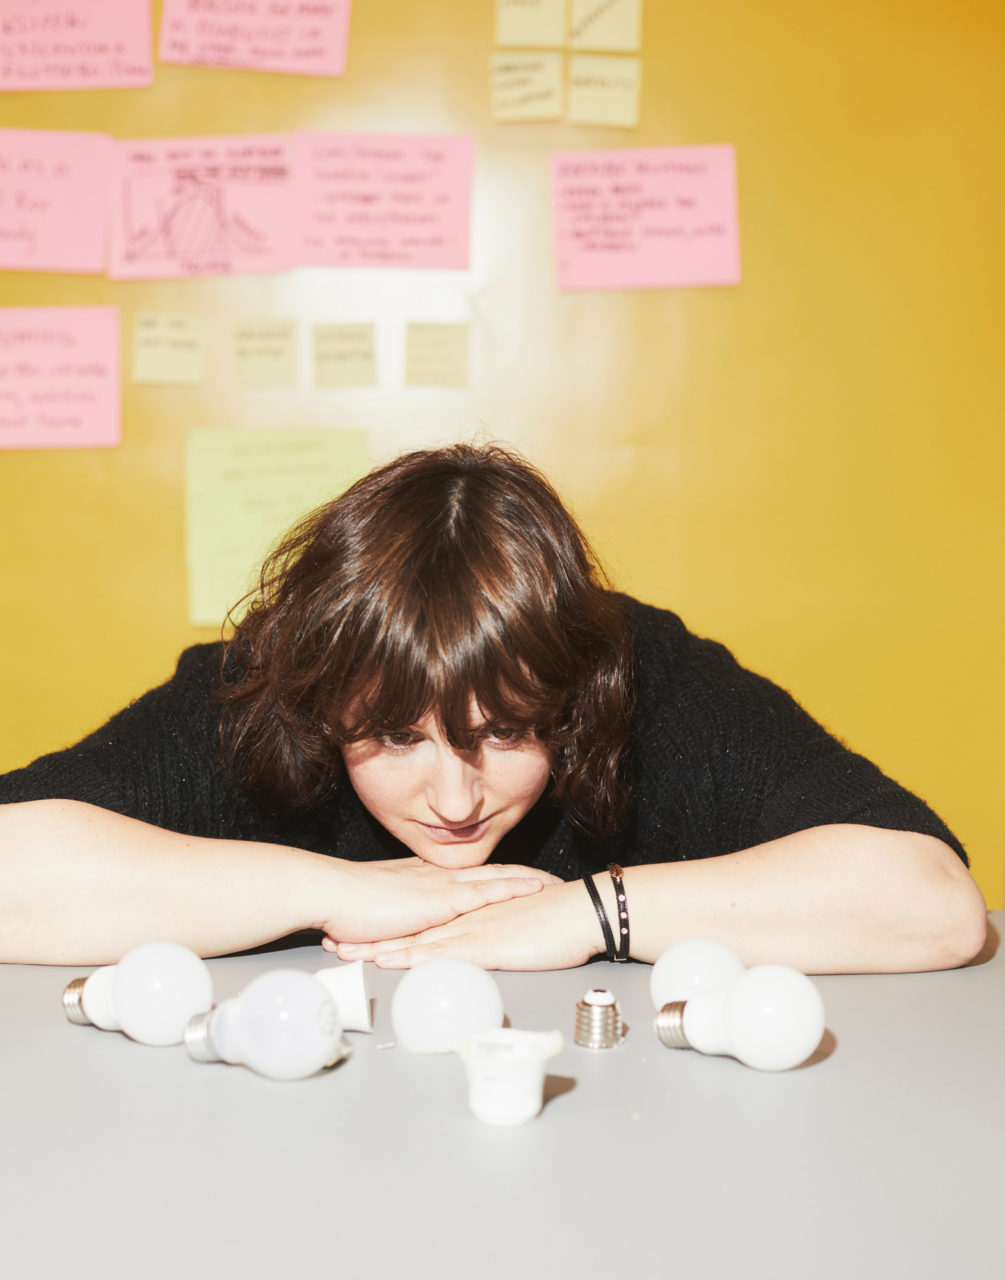 Paulina Pajak, resting chin on hands, looks at LED bulb parts scattered on grey table top.